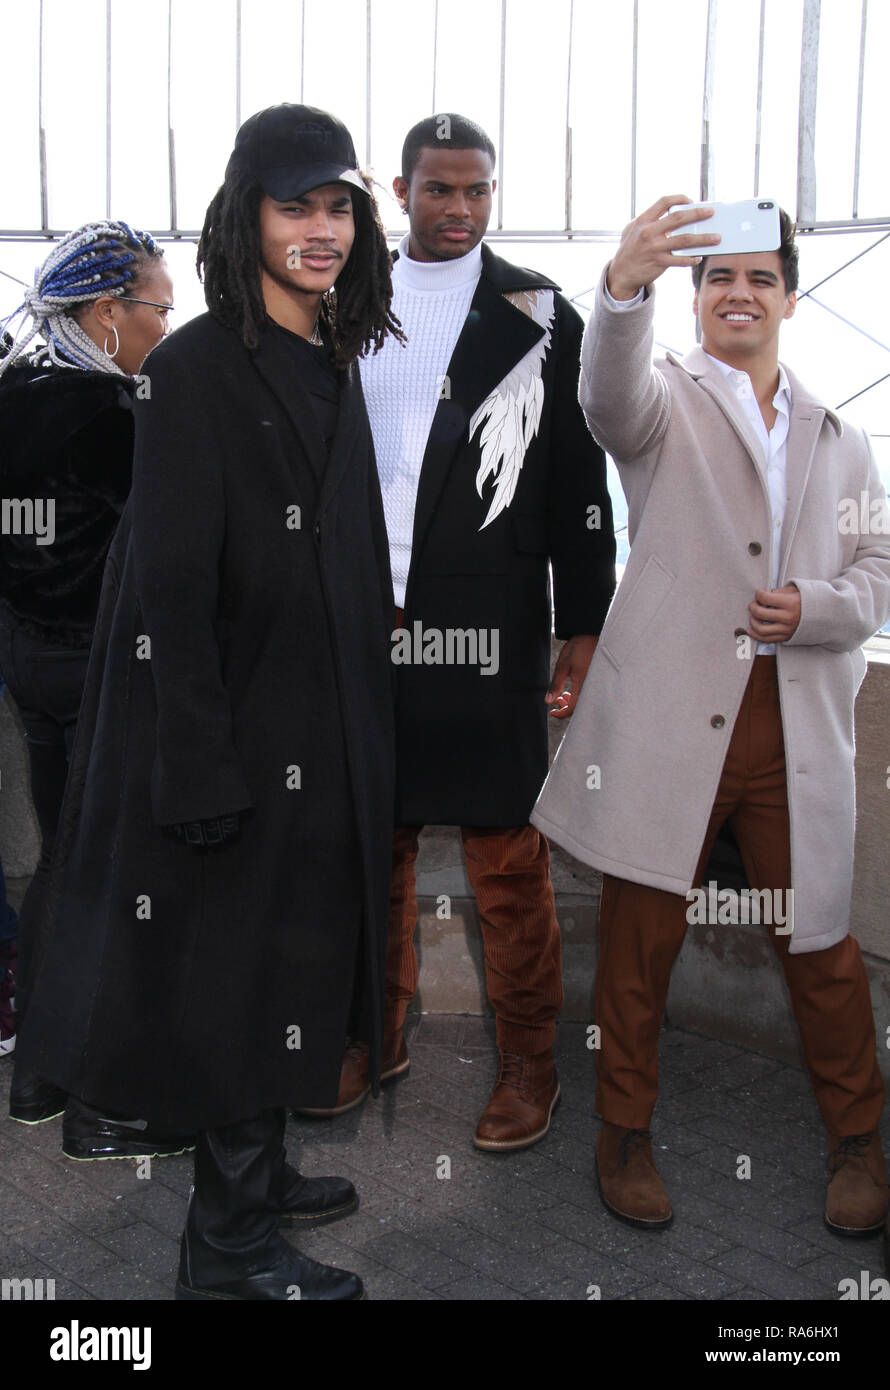 New York, NY, USA. 2nd Jan, 2019. Luka Sabbat, Trevor Jackson, Jordan Buhat cast of the Grown-ish visit the Empire State Observation Deck at the Empire State Building in New York January 2, 2019 Credit: Rw/Media Punch/Alamy Live News Stock Photo